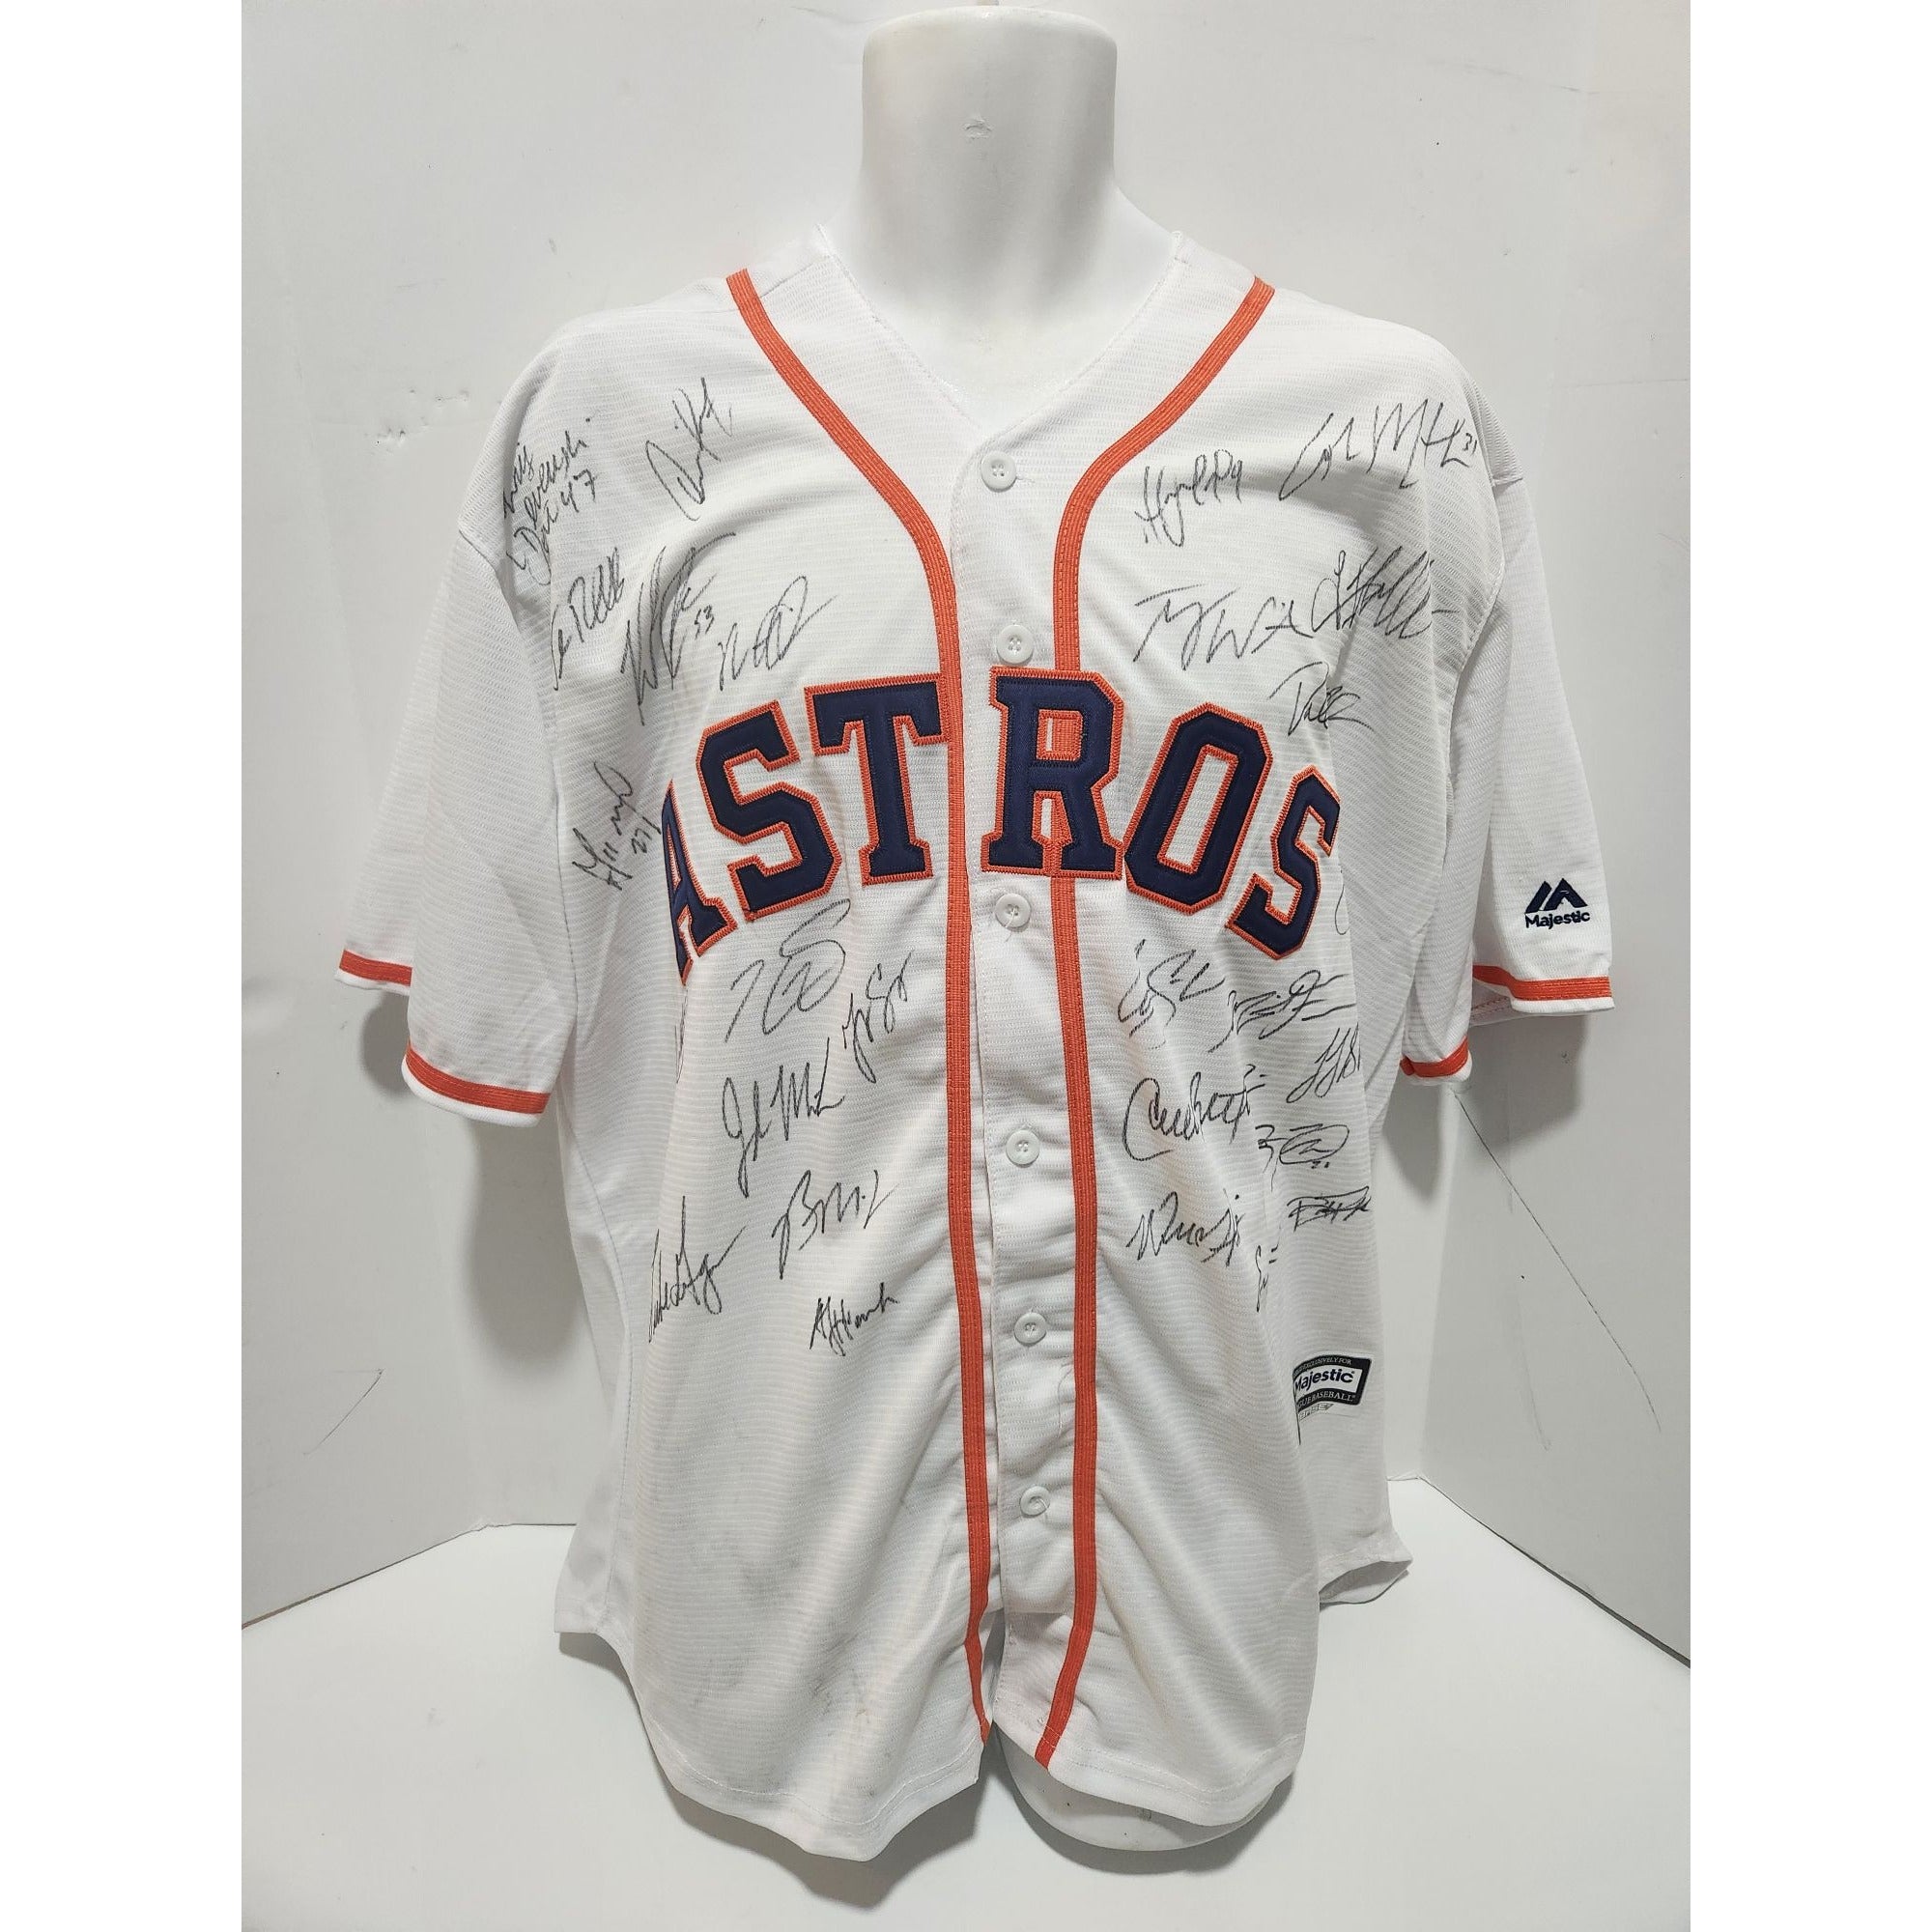 George Springer Houston Astros Autographed Majestic Authentic Home